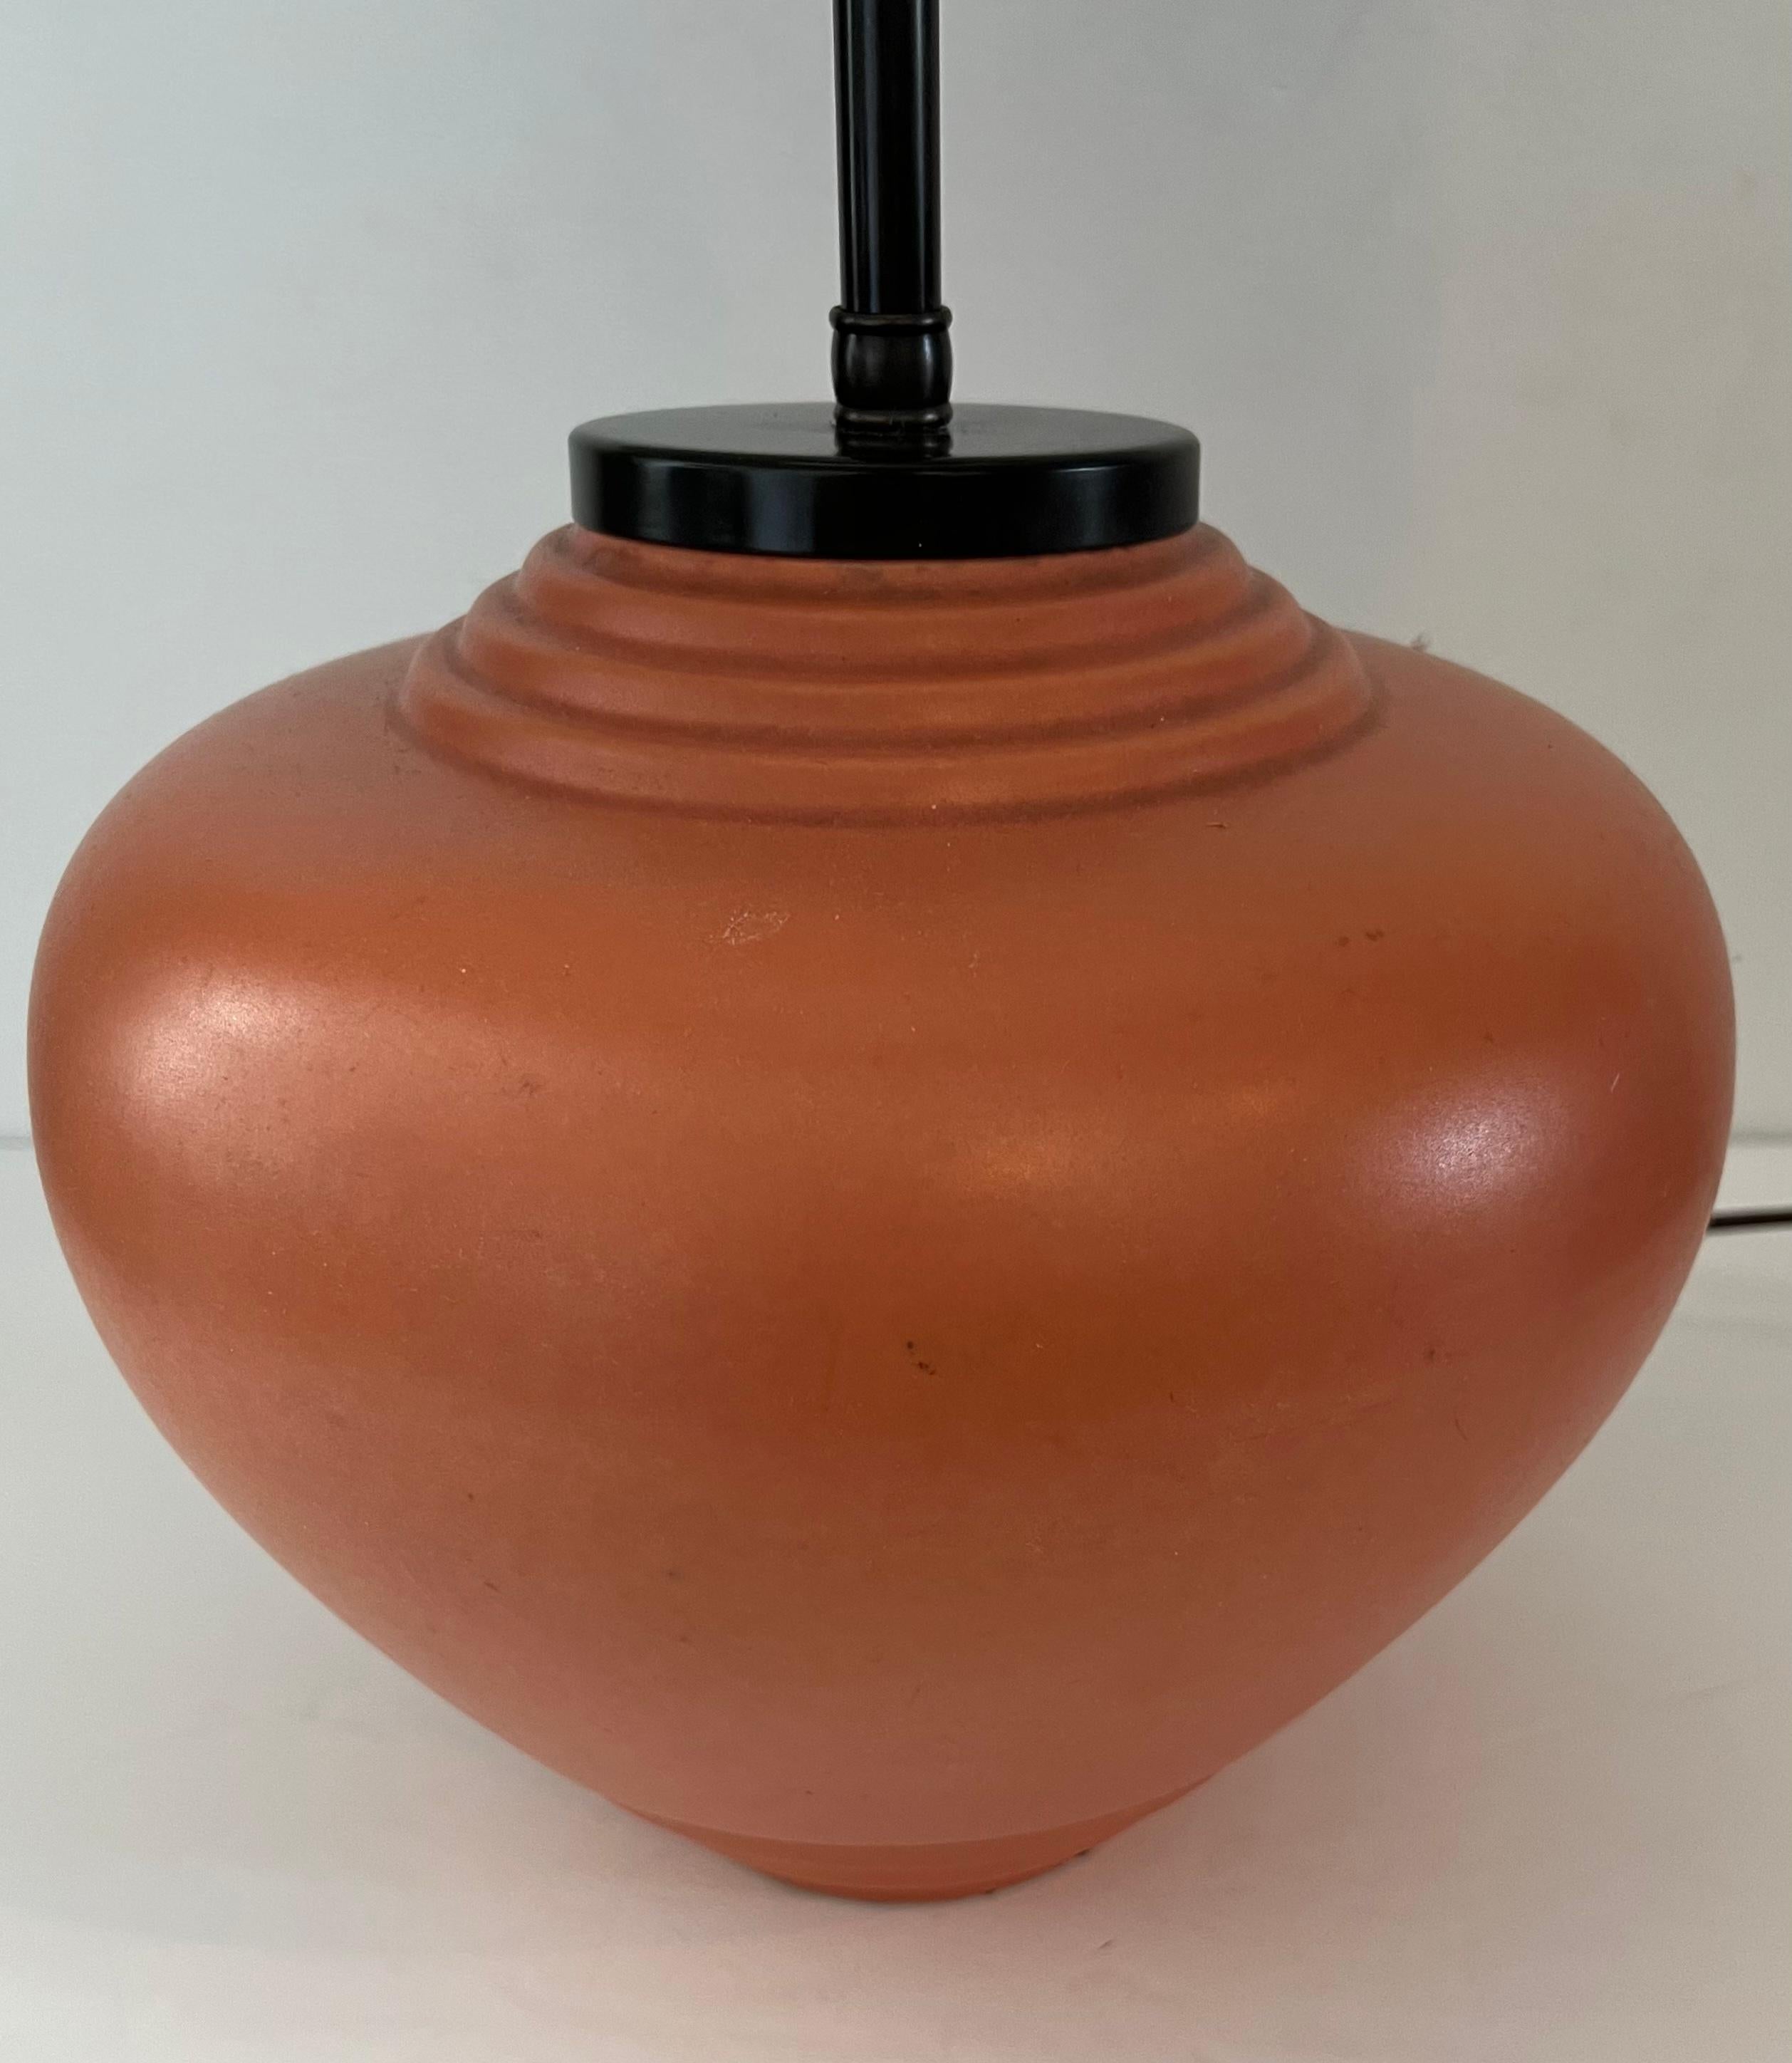 An original French Art Deco ceramic ovoid table lamp with dark aged bronze double sockets. Rewired with brown silk cord. Signed. Ceramic vase measures 8.5 H x 8” W. Shade can be included but must pay for a second shipping box.